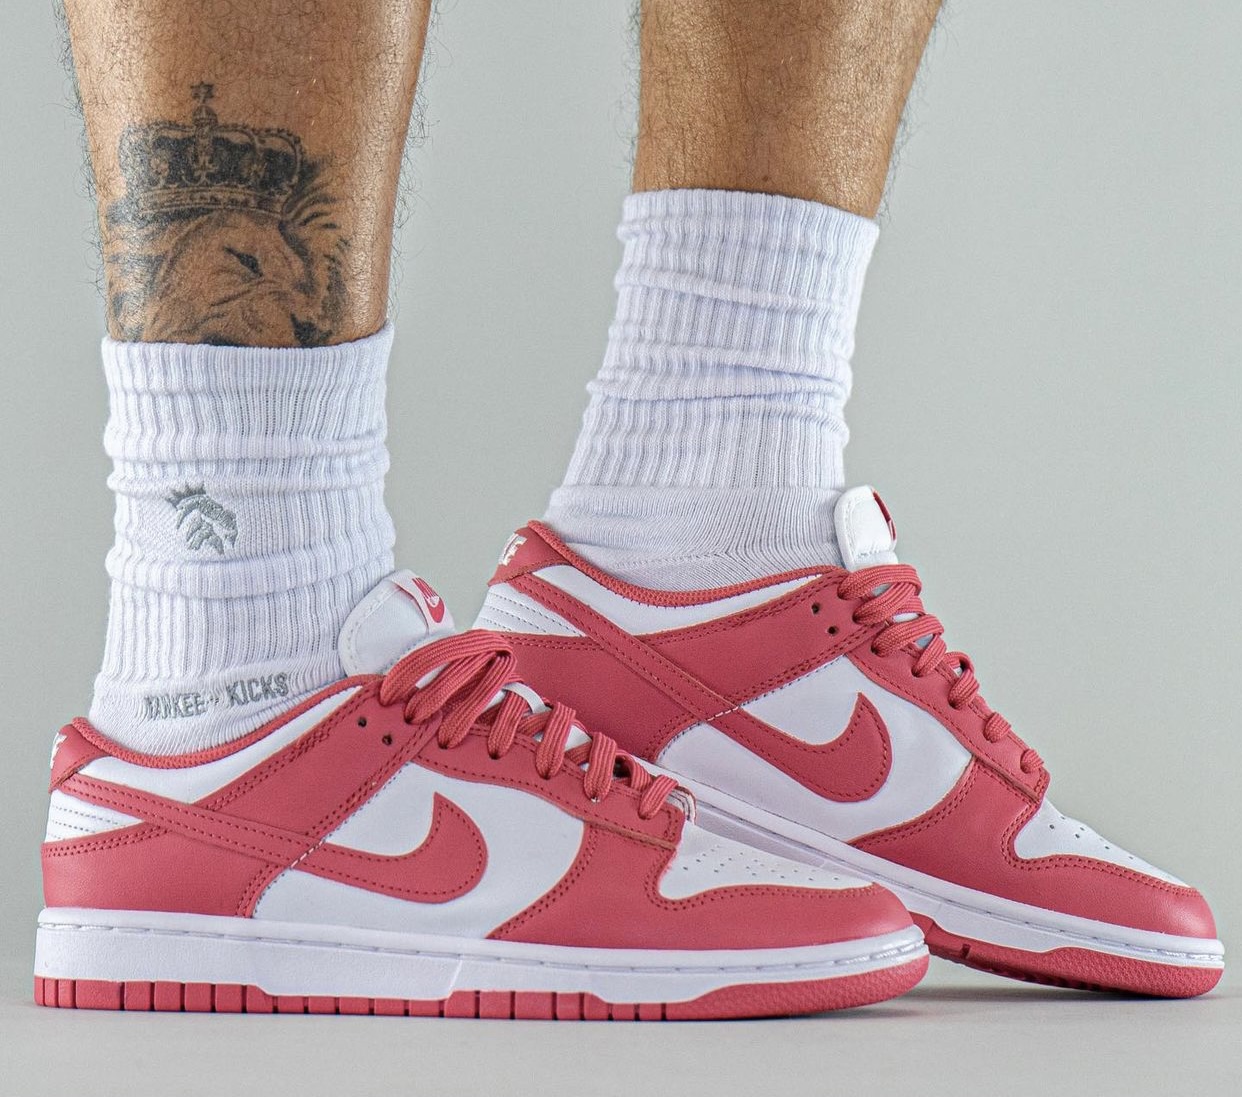 Nike Dunk Low Archeo Pink White DD1503 111 Release Date 5